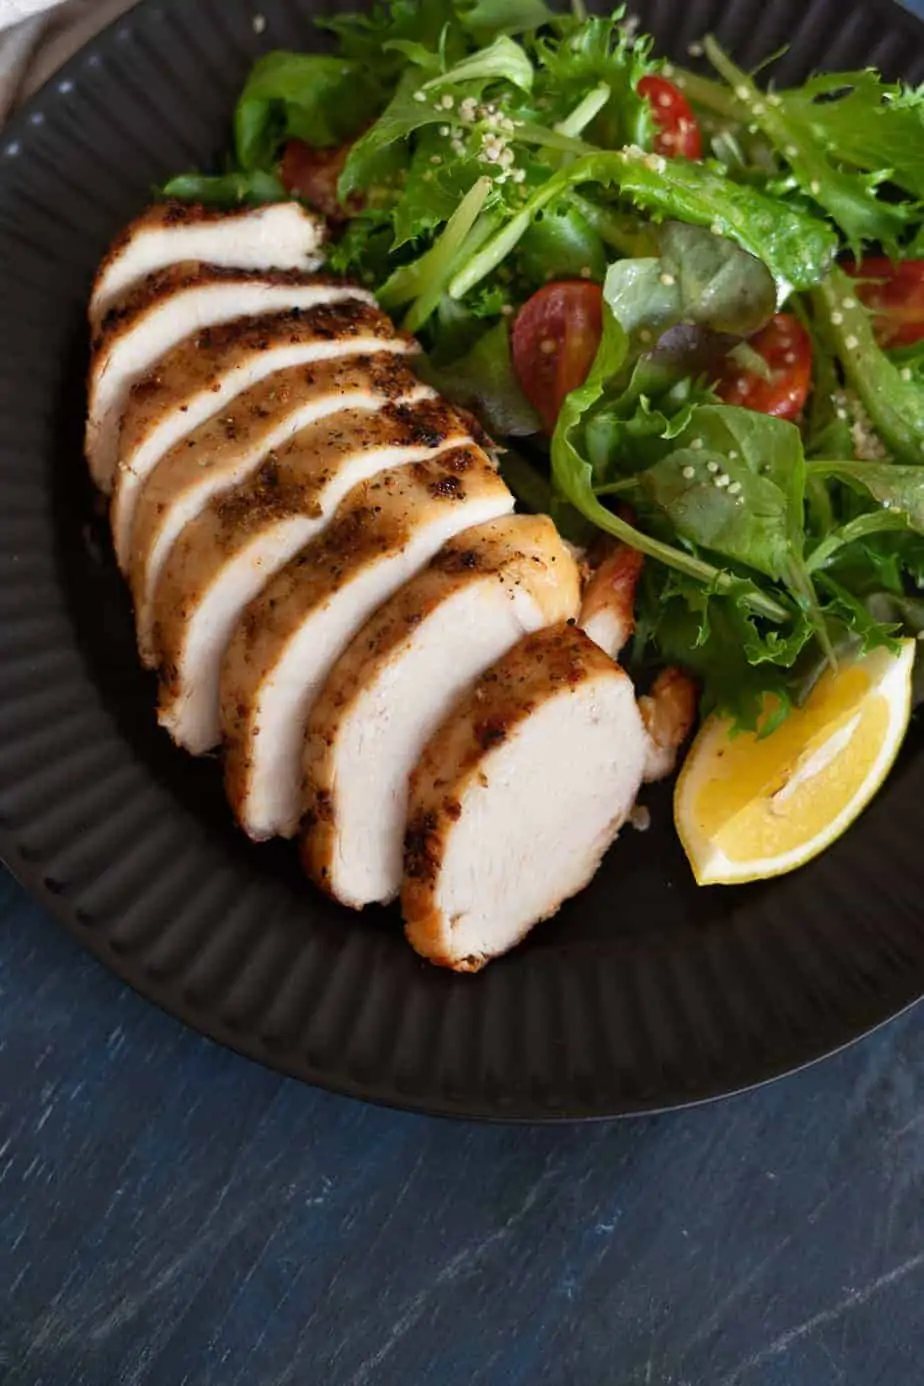 perfectly cooked frozen chicken breast sliced and served with a salad of baby lettuces mix and cherry tomatoes.